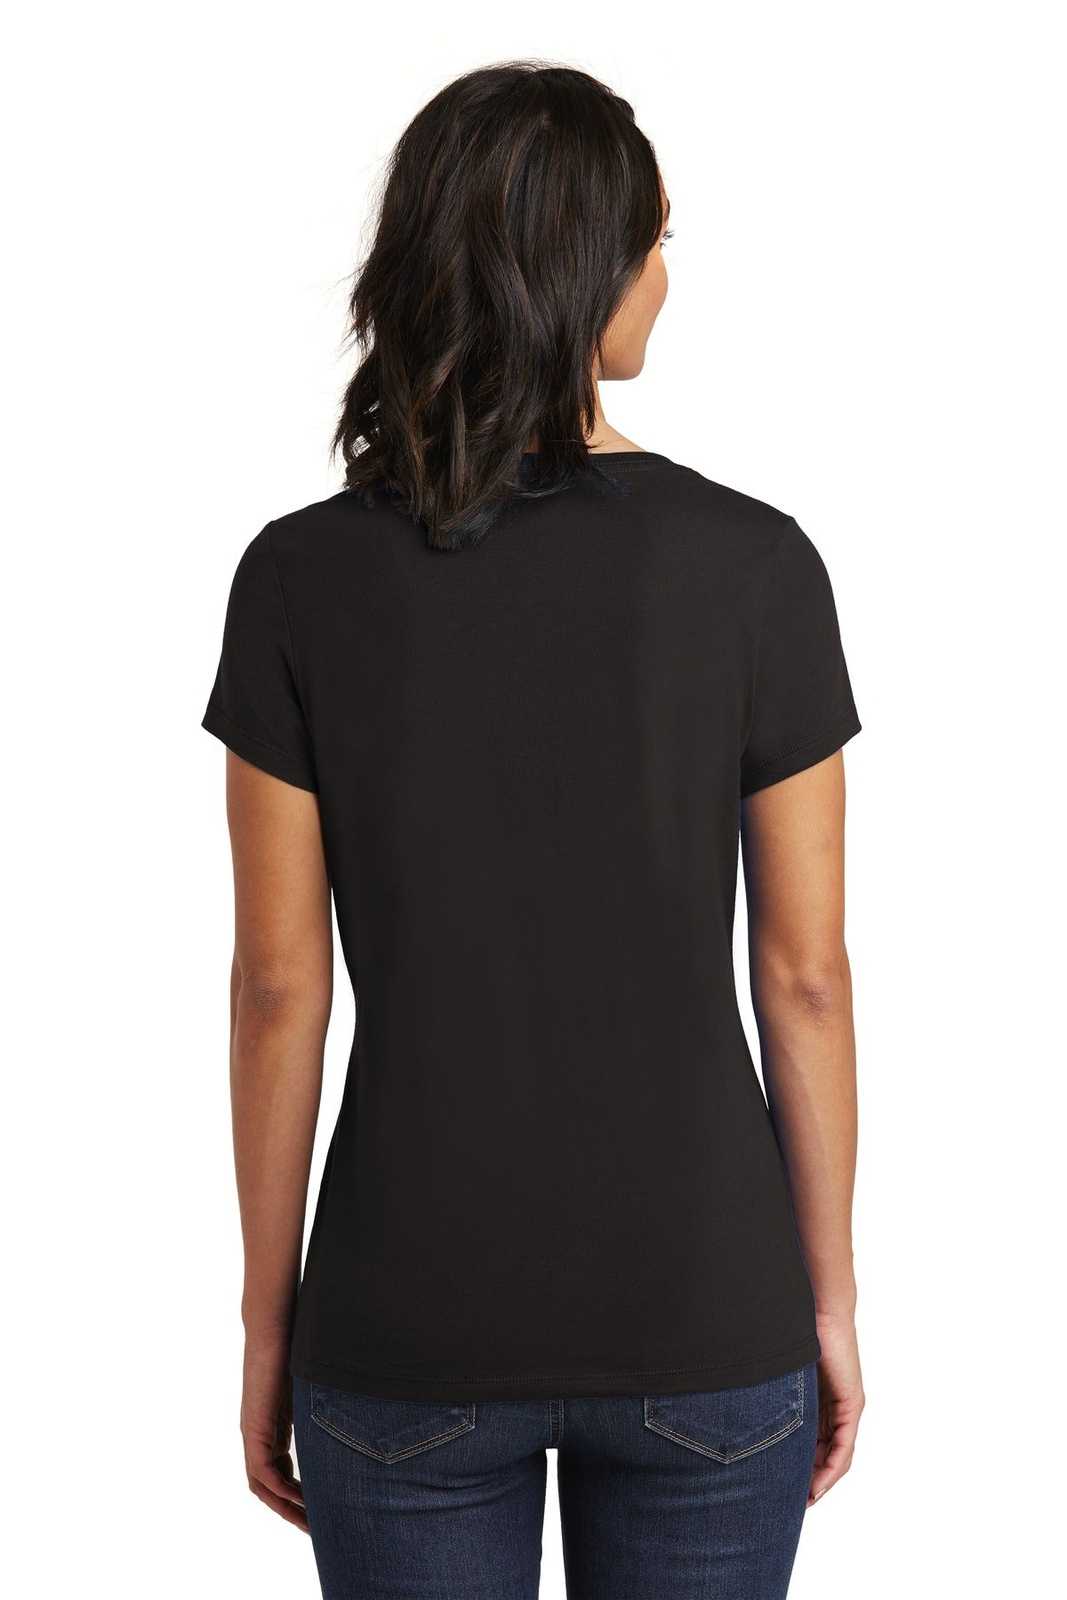 District DT6503 Women's Very Important Tee V-Neck - Black - HIT a Double - 1